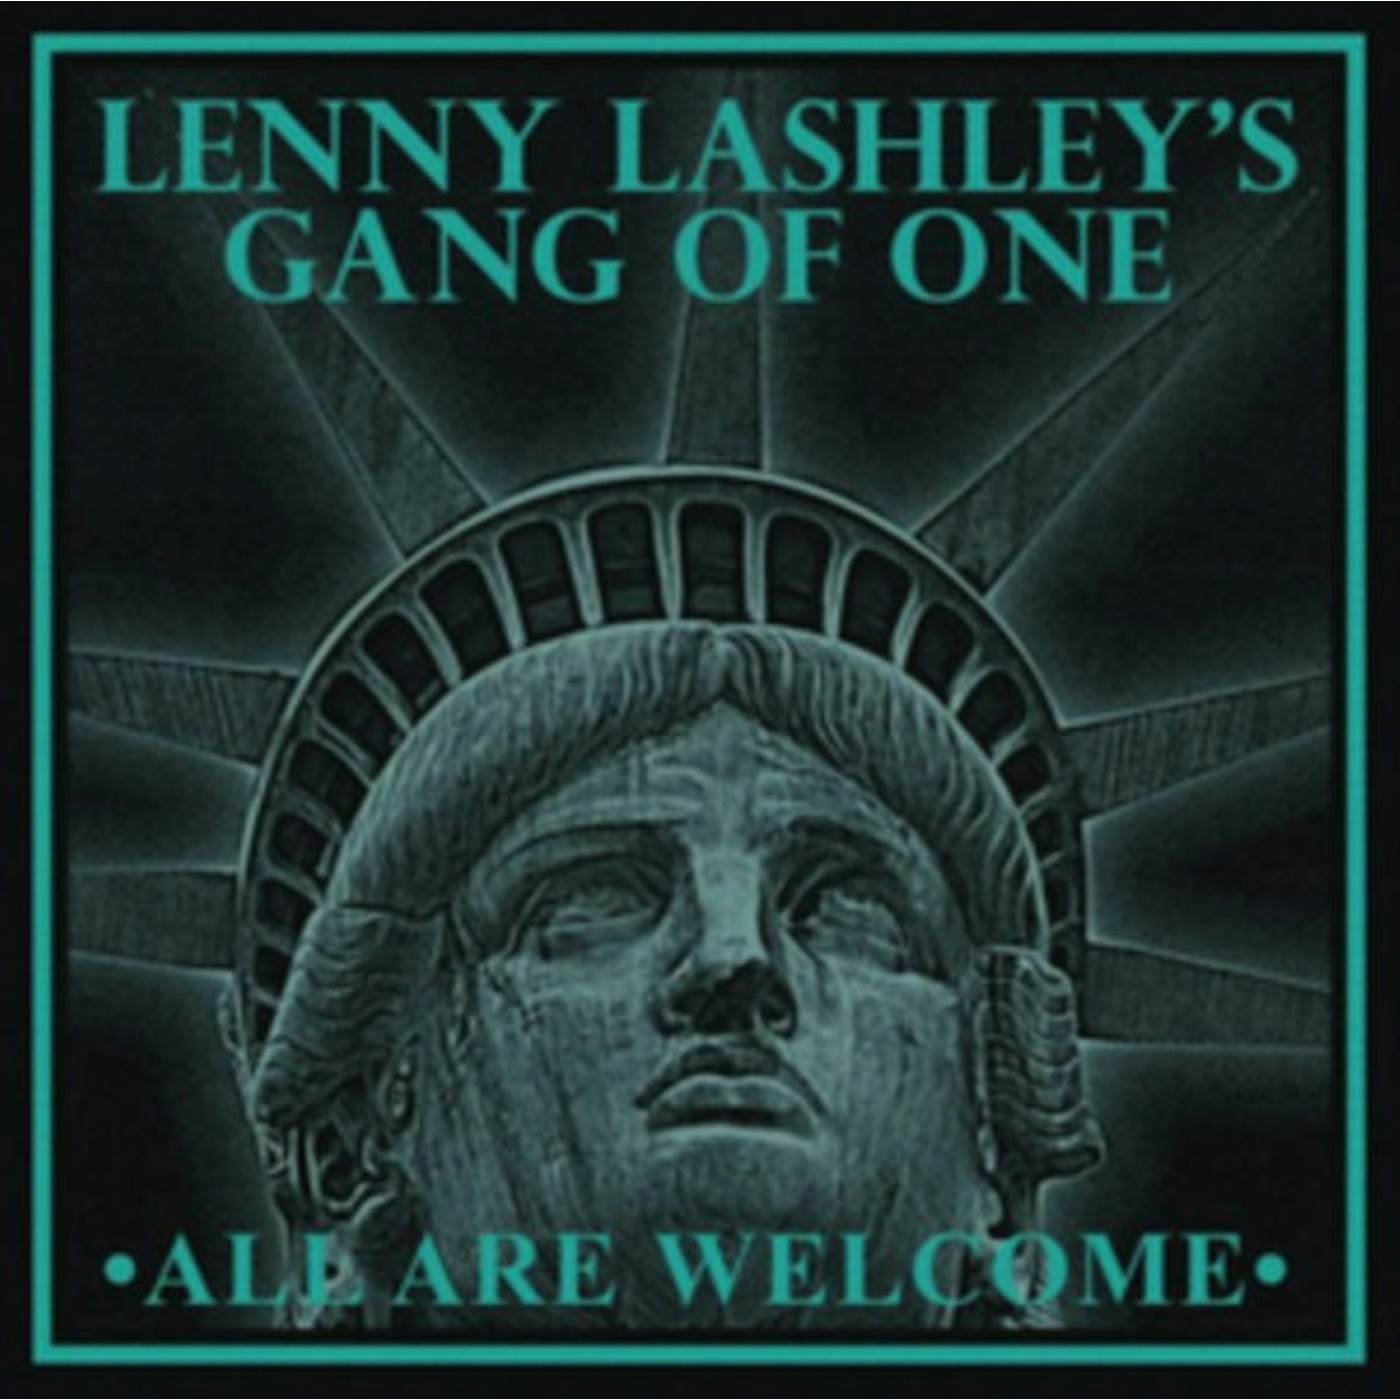 Lenny Lashley's Gang Of One CD - All Are Welcome